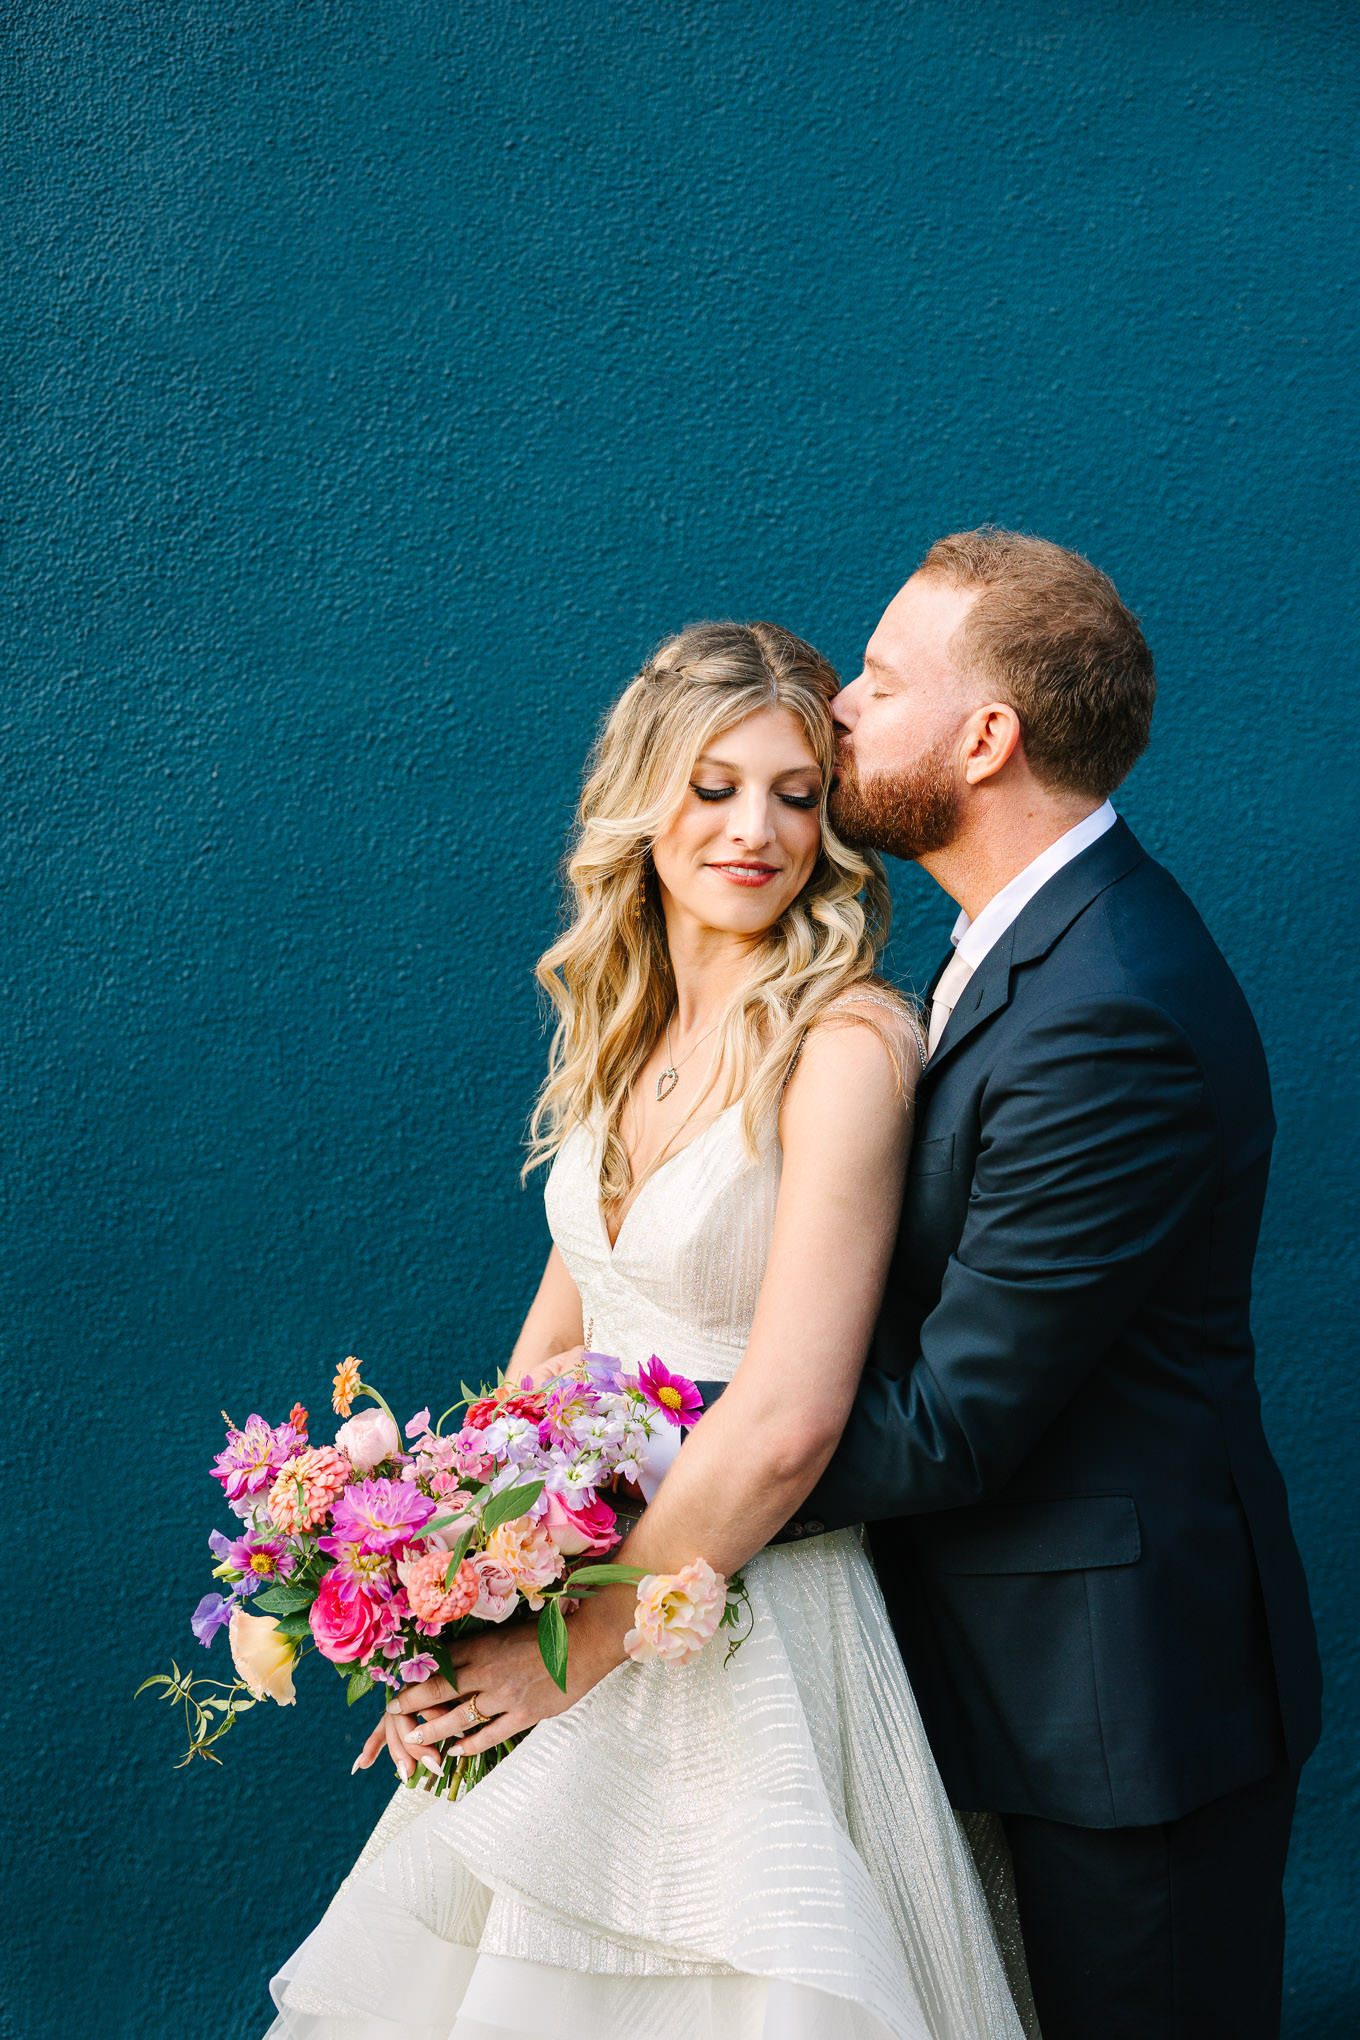 Fig House Los Angeles wedding | Wedding and elopement photography roundup | Los Angeles and Palm Springs photographer | #losangeleswedding #palmspringswedding #elopementphotographer Source: Mary Costa Photography | Los Angeles